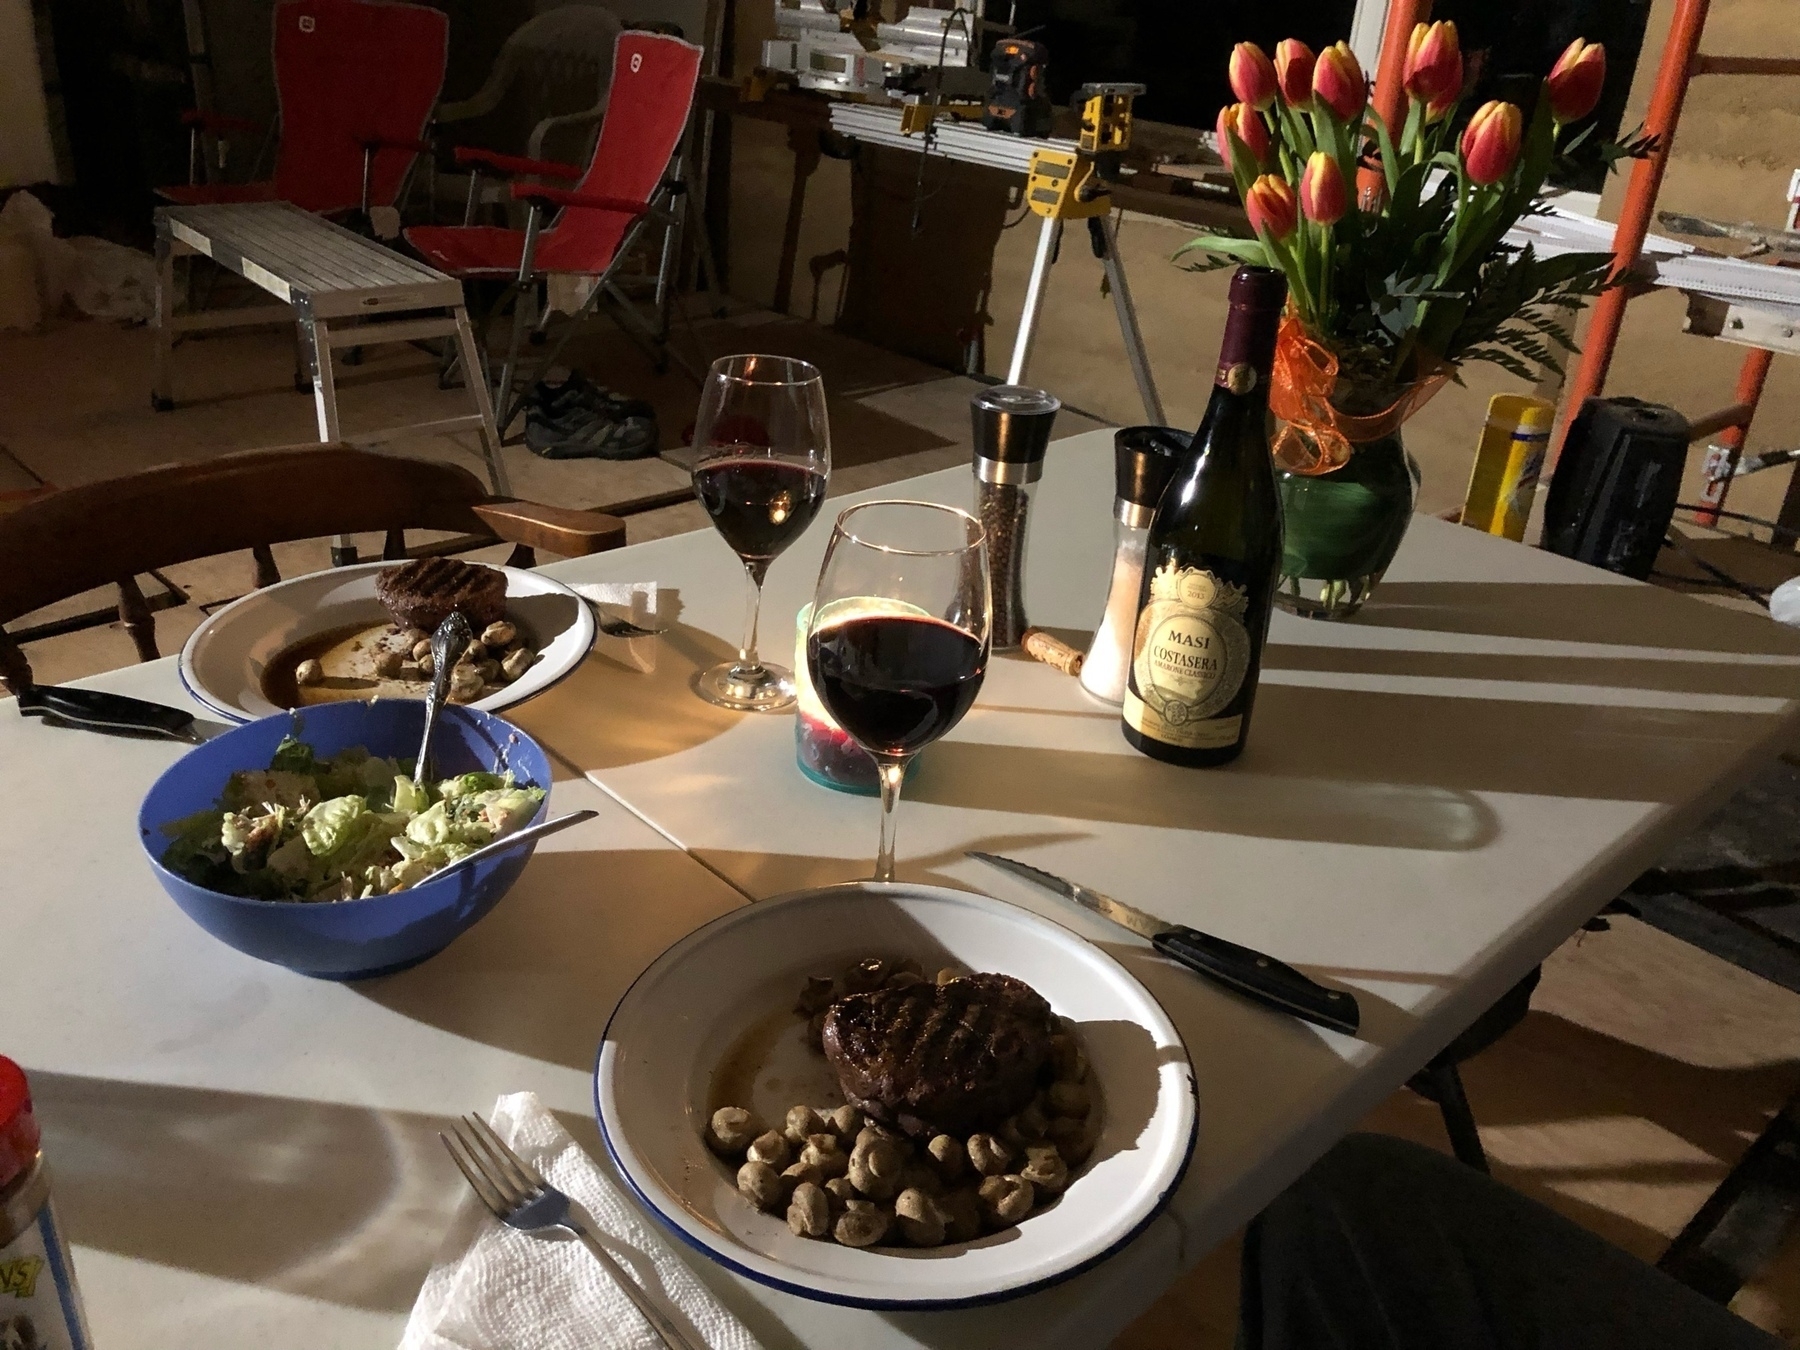 steak and mushrooms on 2 plates sitting on a wooden table. there are orange tulips in a vase on the table